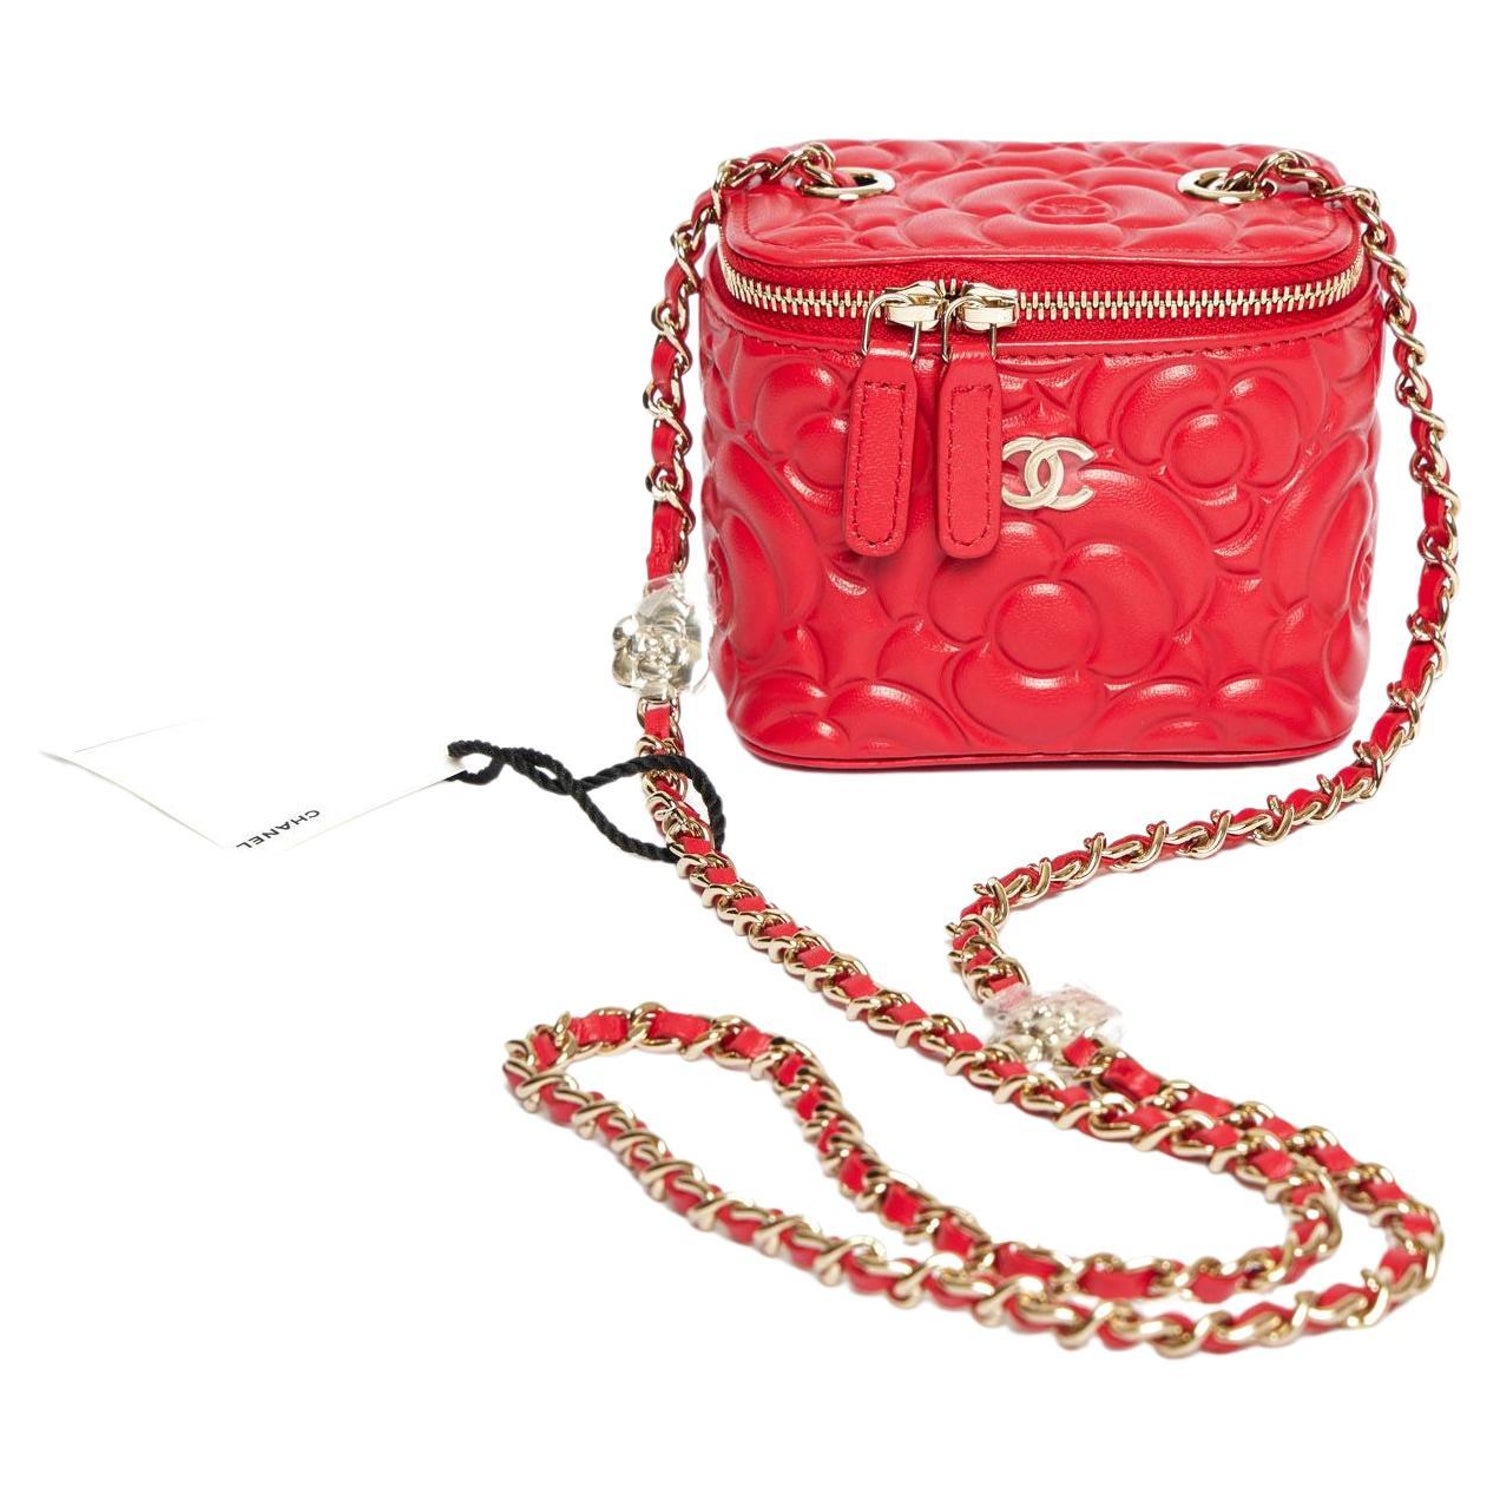 Chanel Vanity Case 2021 - 8 For Sale on 1stDibs  chanel caviar vanity case,  chanel vanity bag 2021, chanel vanity with chain